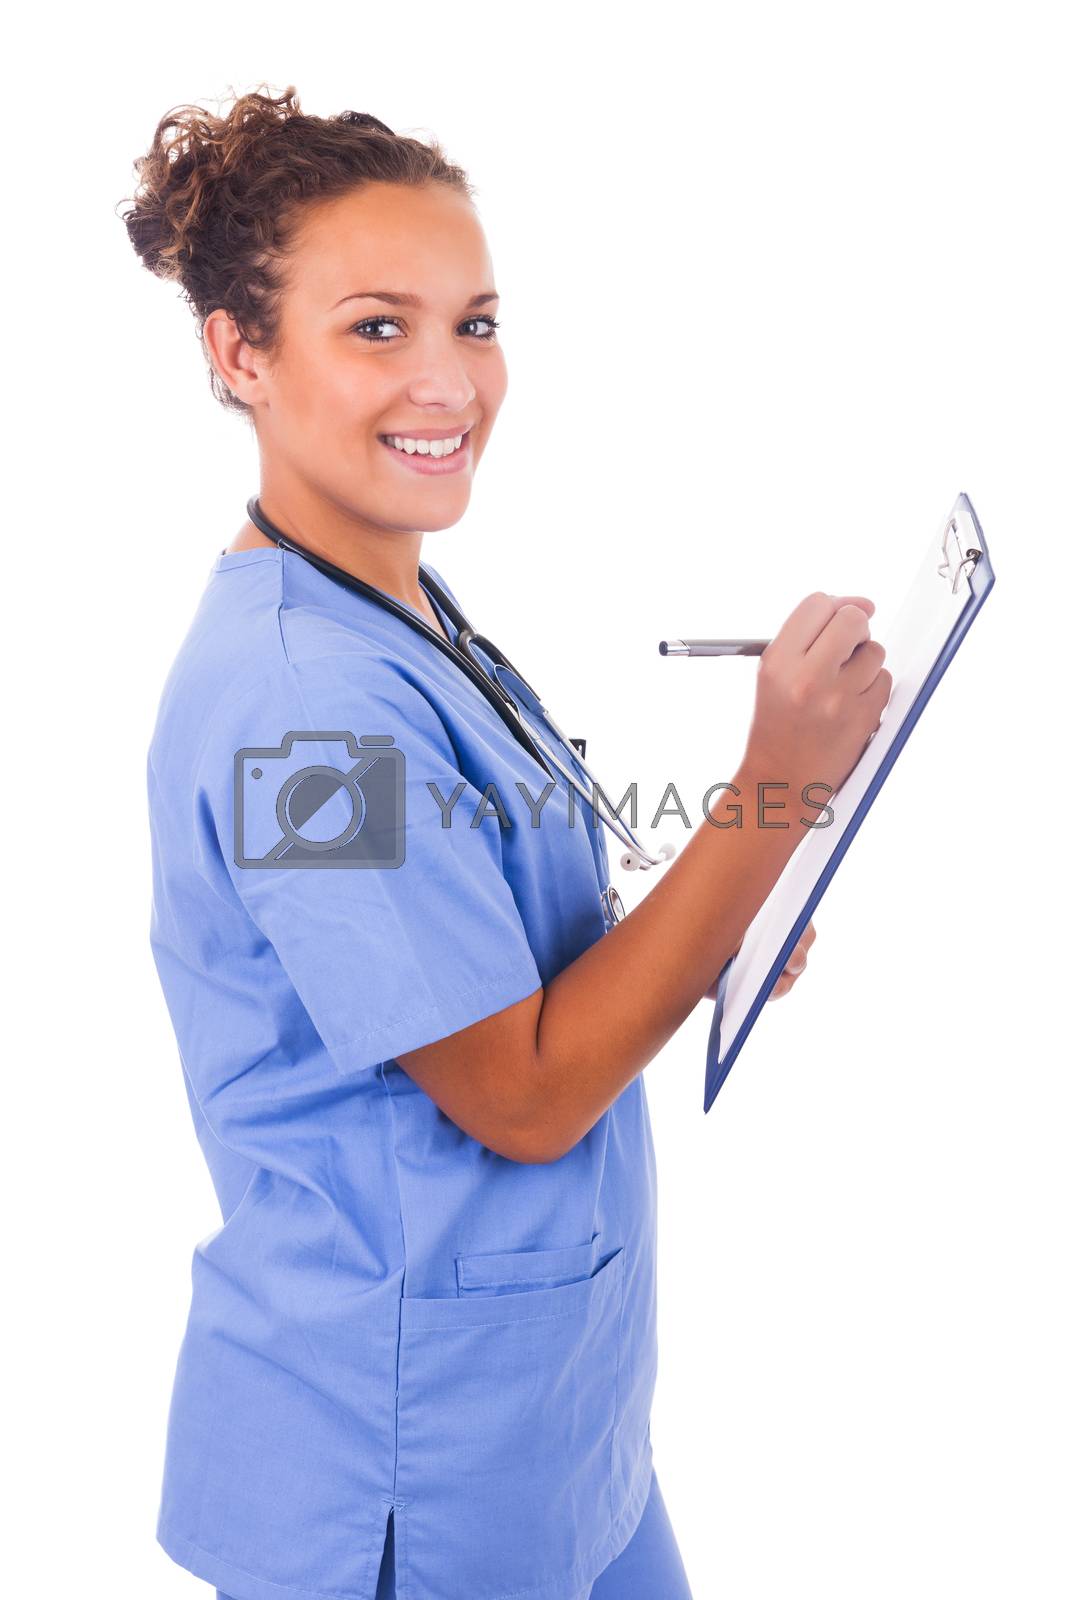 Royalty free image of Young doctor with stethoscope isolated on white background by michel74100